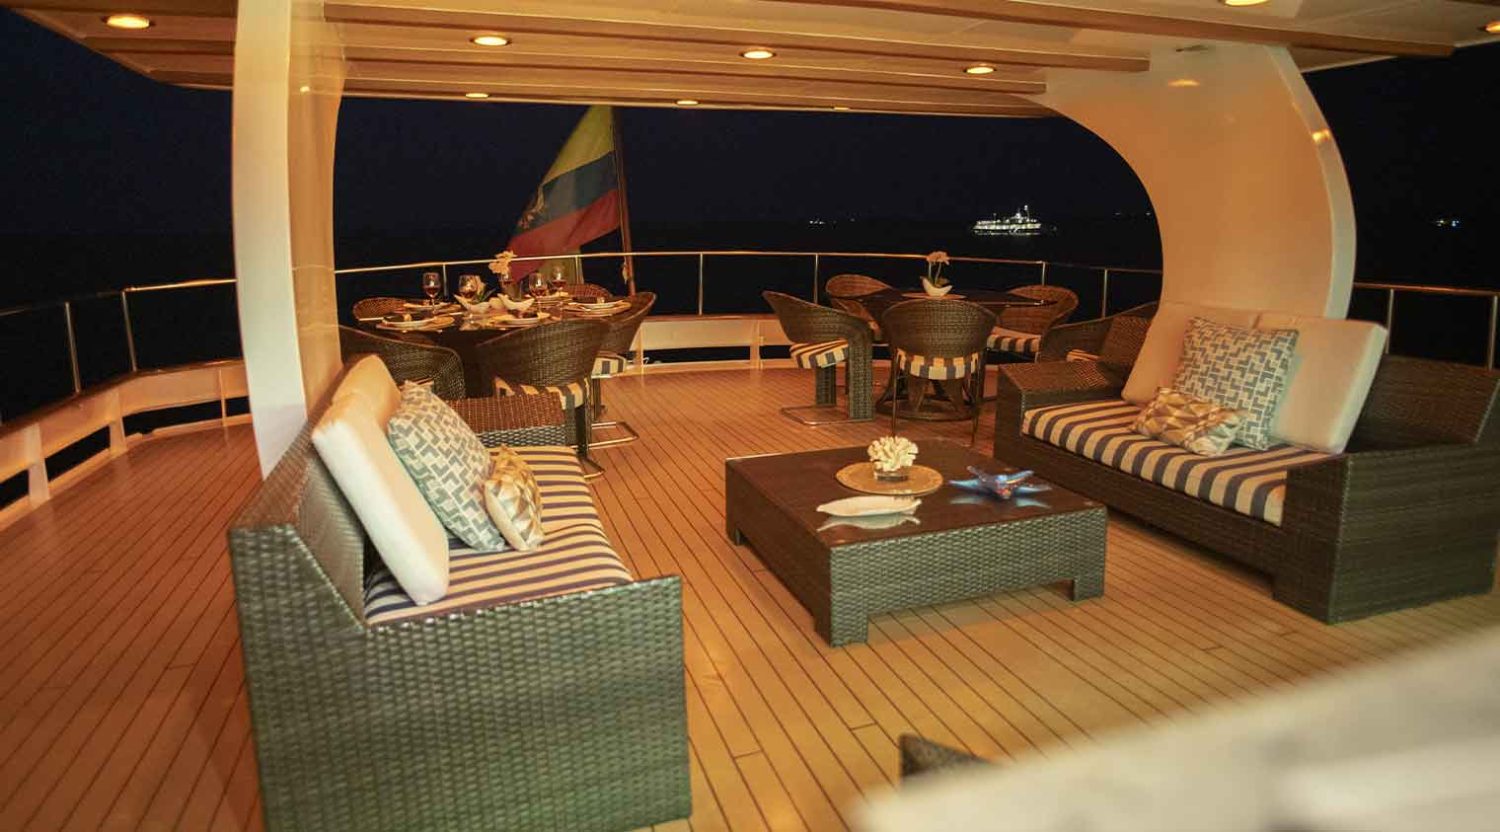 outdoor living room of stella maris yacht of galapagos islands